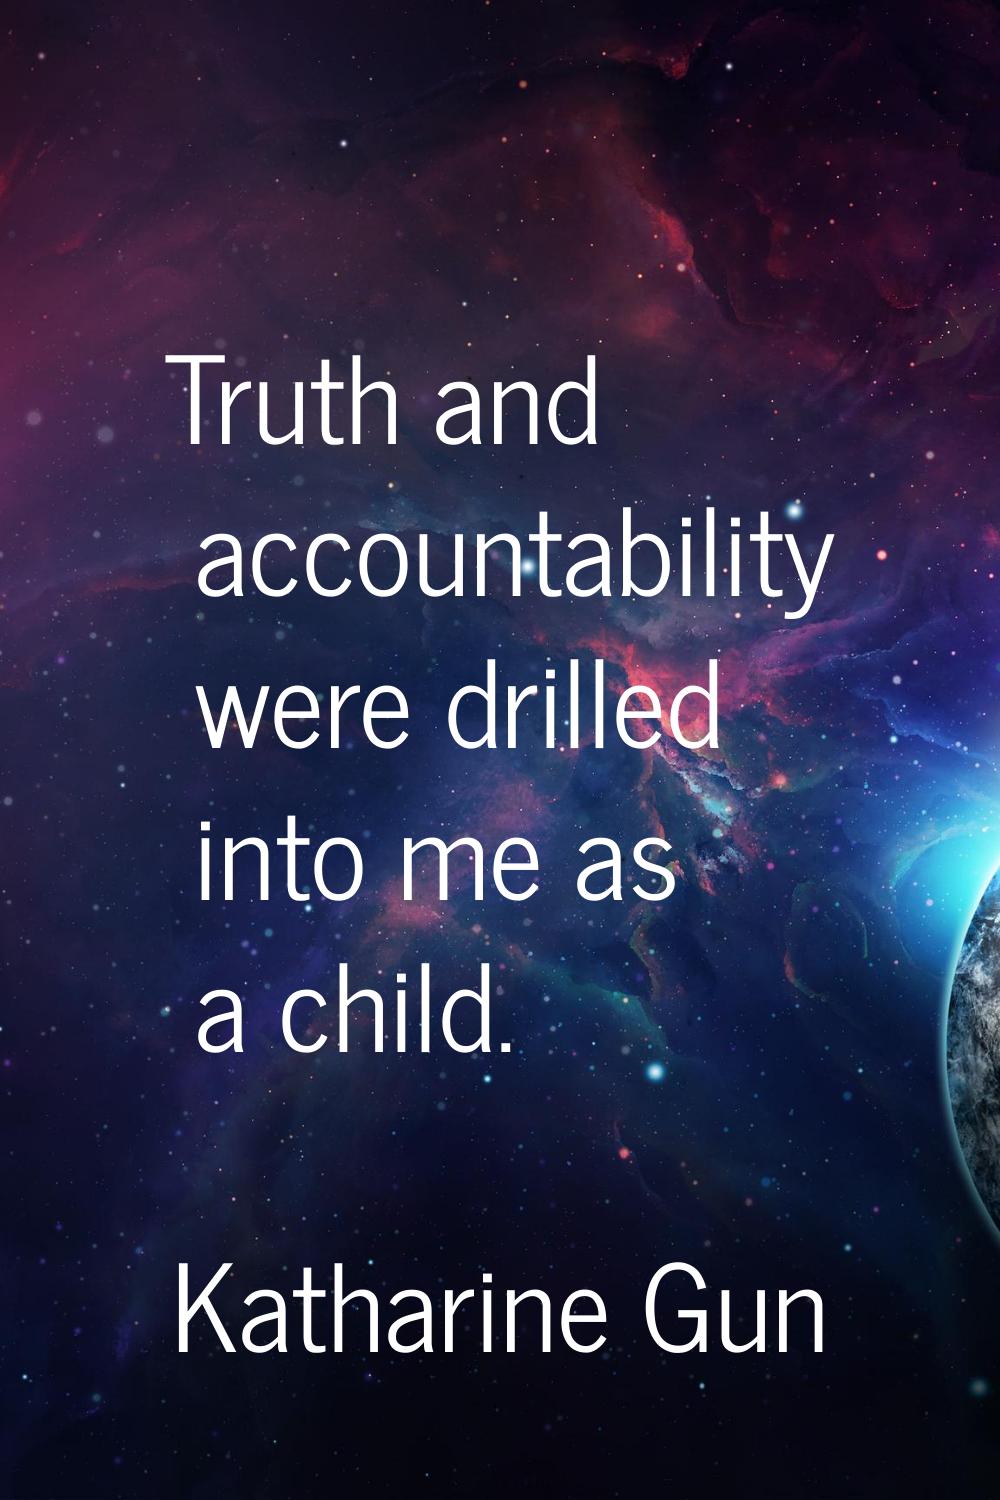 Truth and accountability were drilled into me as a child.